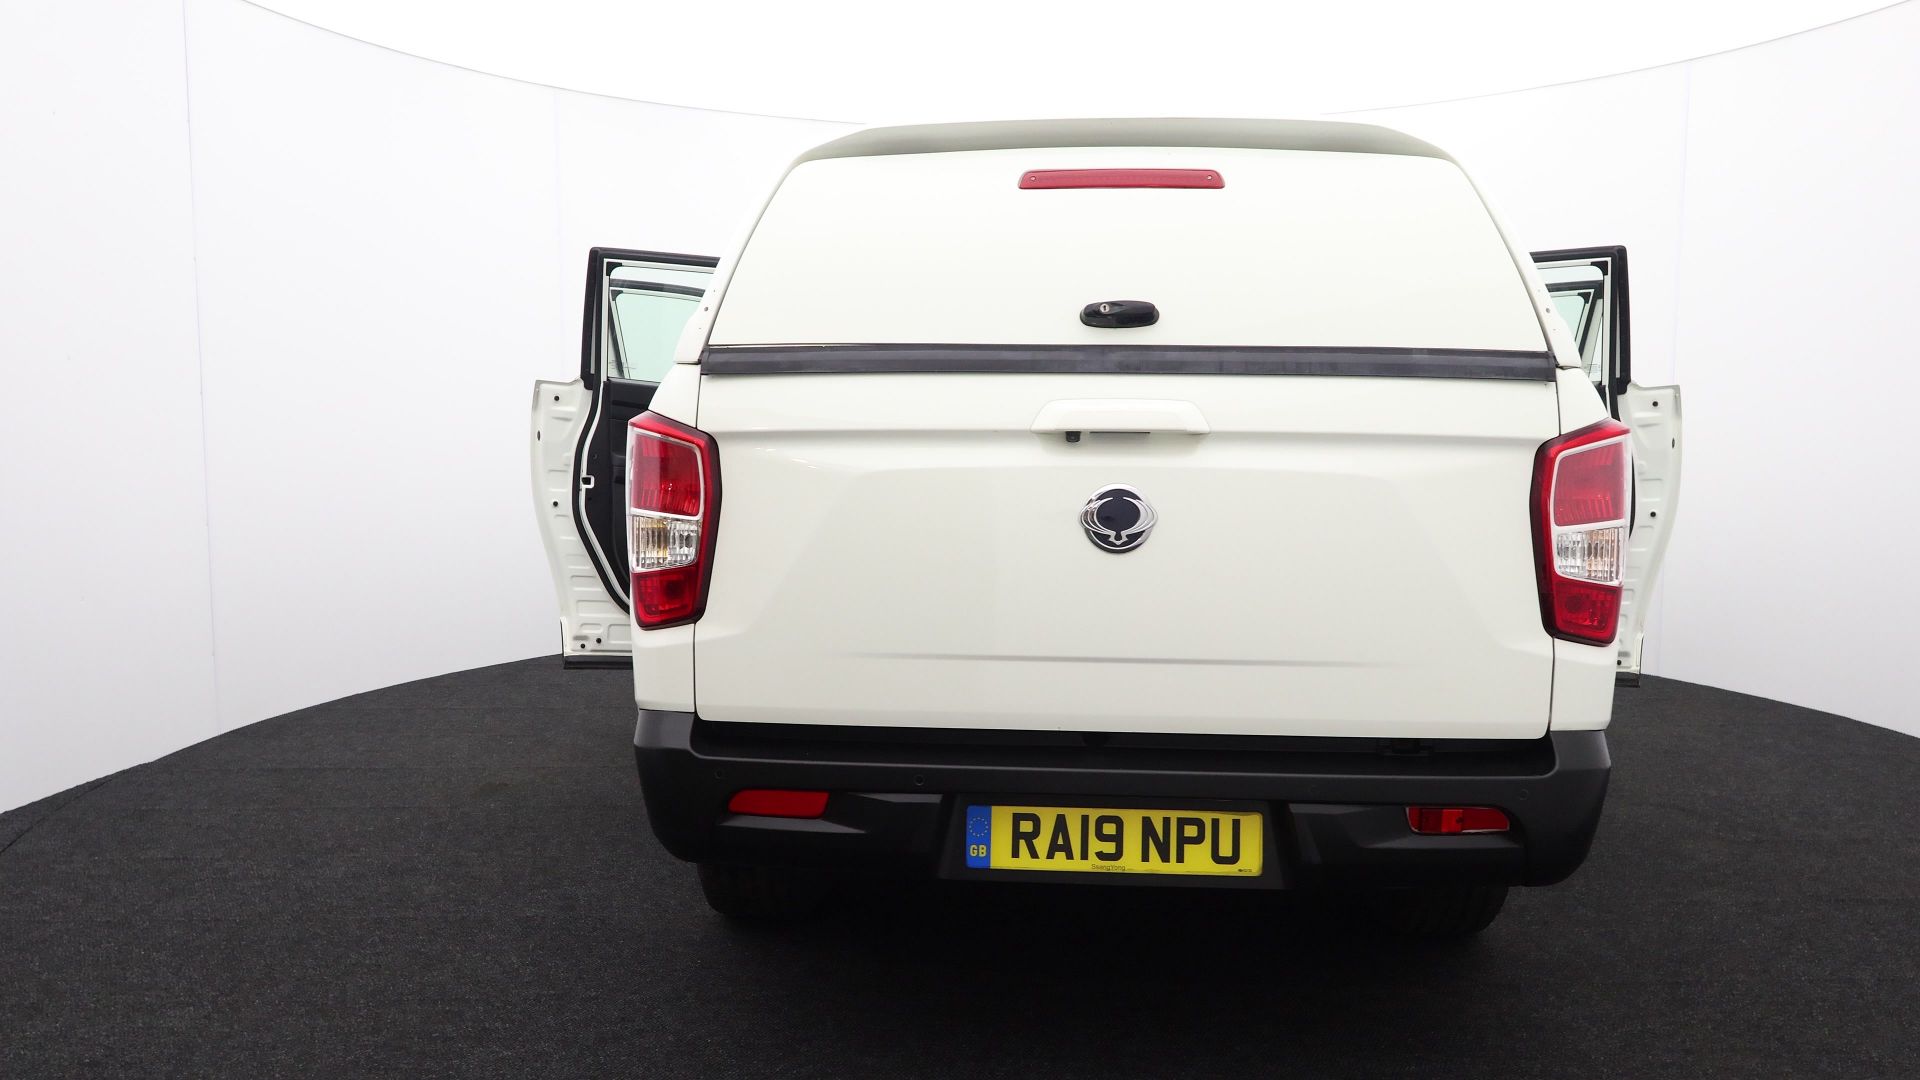 SsangYong Musso Rebel Auto RA19 NPU 2.2L Pick Up Euro 6 - Image 64 of 70